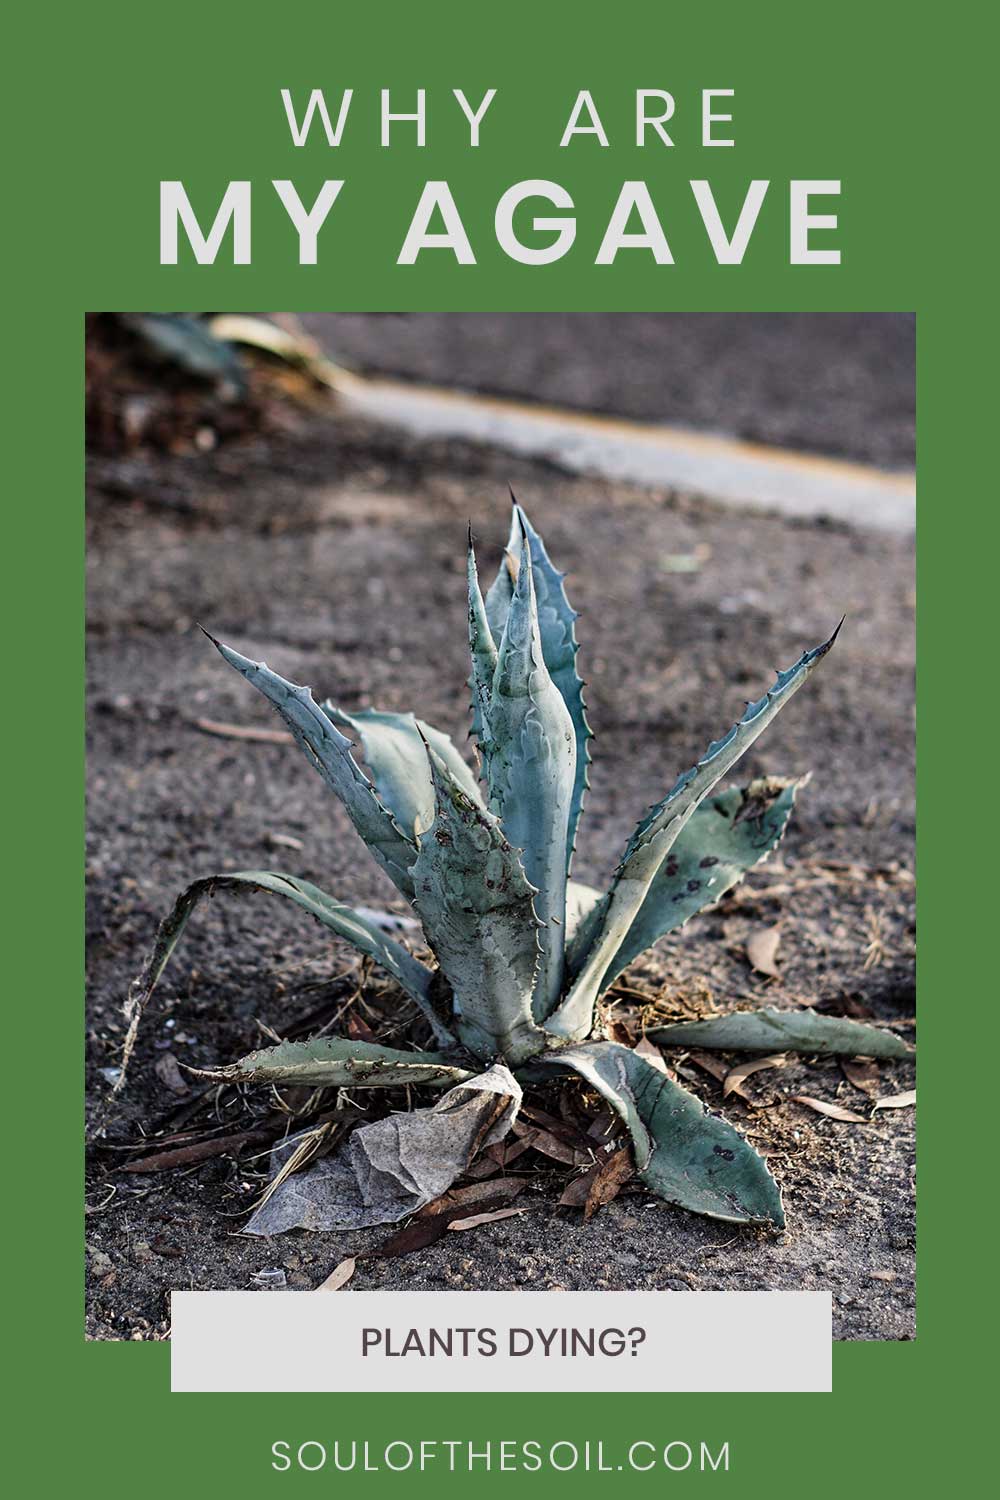 A dying Agave plant - Why is it dying?